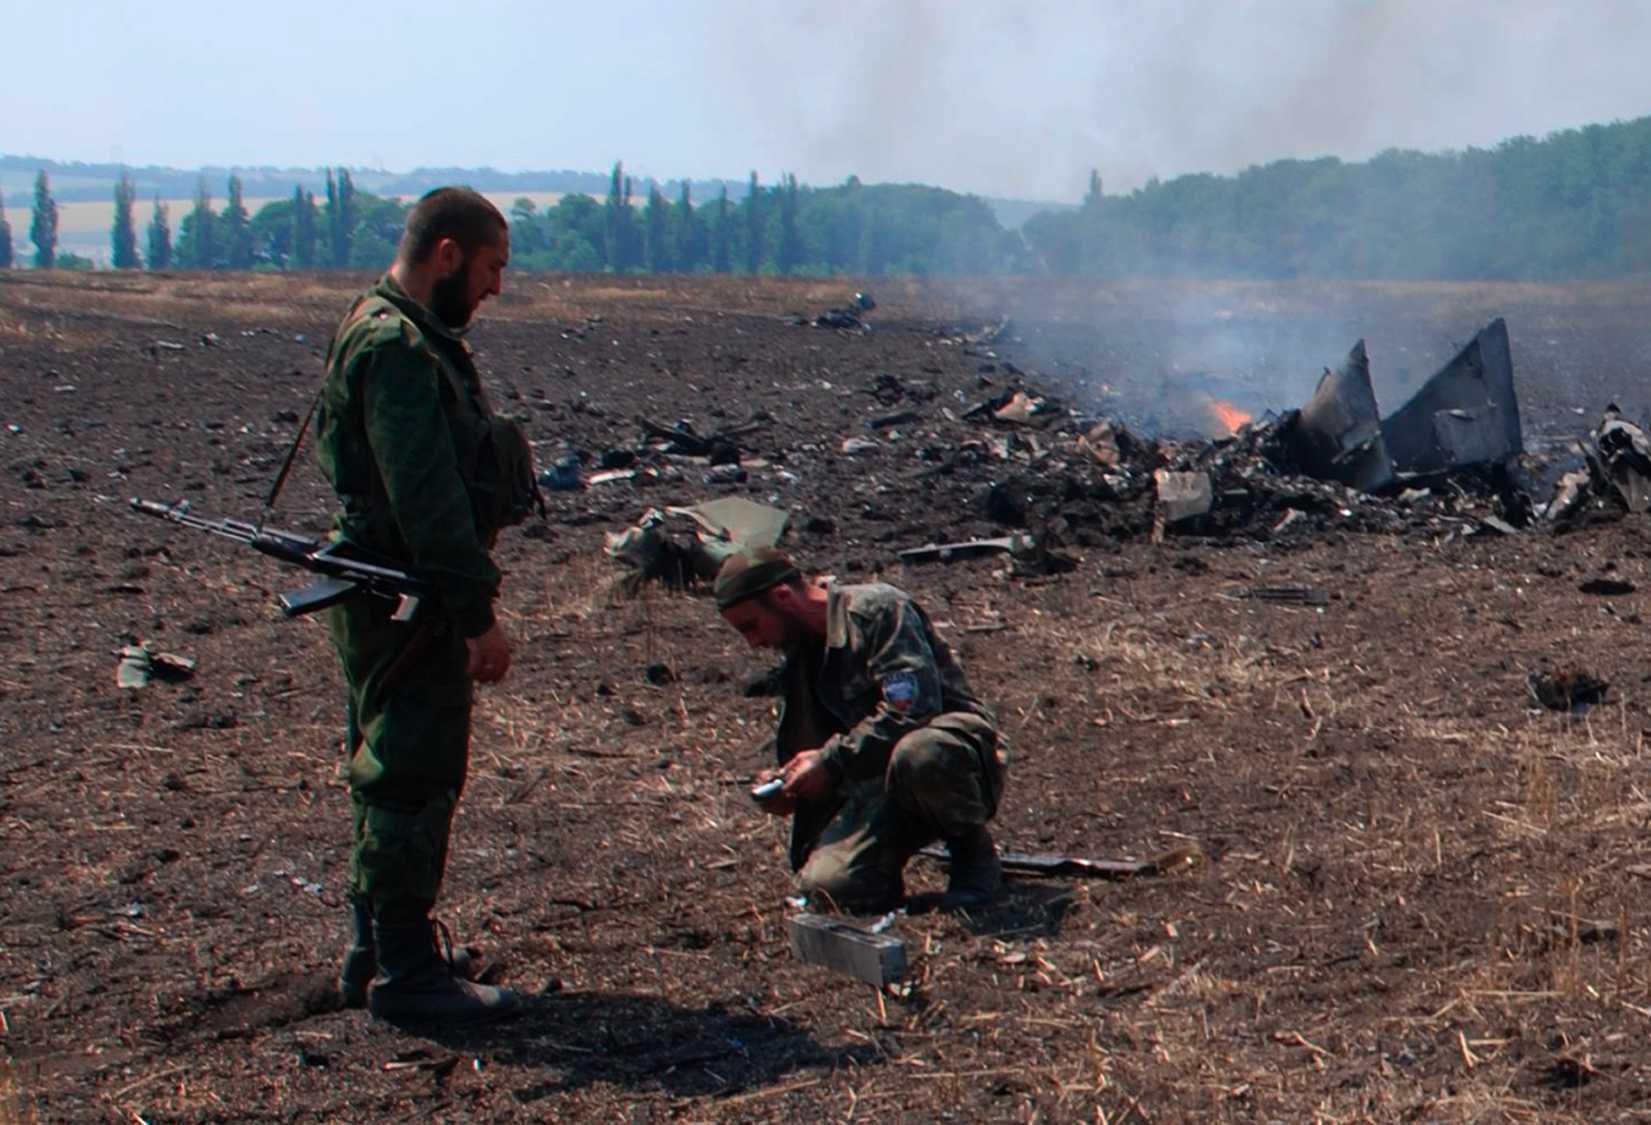 In this framegrab made from a video provided by press service of the rebel Donetsk People's Republic and icorpus.ru, pro-Russians collect parts of the burning debris of a Ukrainian military fighter jet, shot down at Savur Mogila, eastern Ukraine, Wednesday, July 23, 2014. (icorpus.ru—AP)